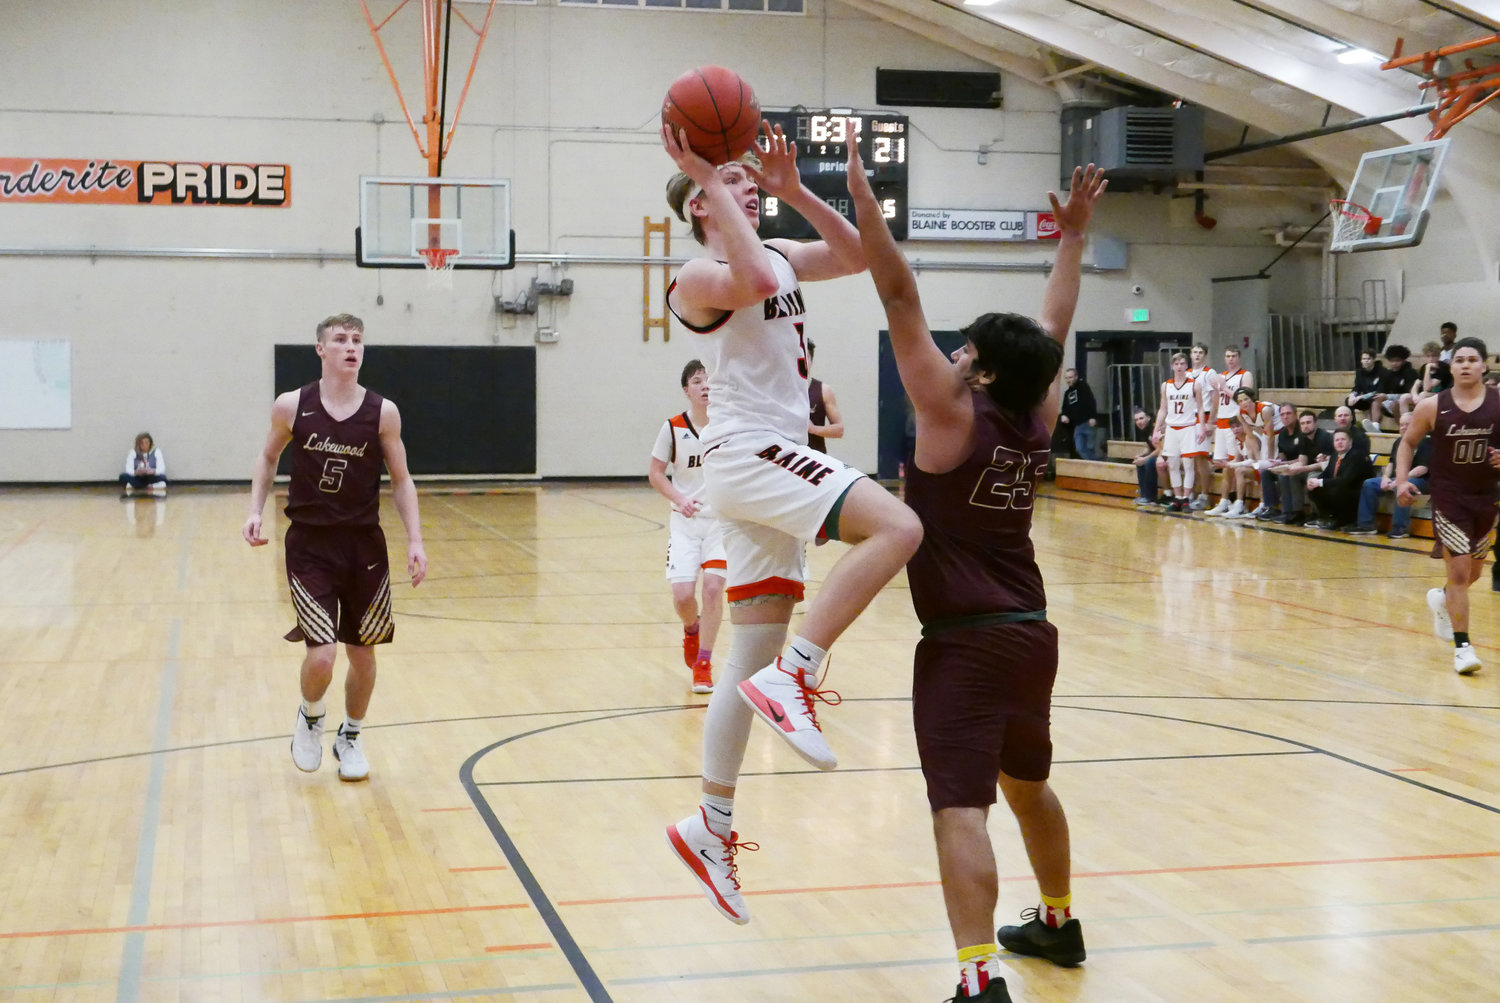 Blaine guard Zane Rector goes for a lay-up in the first half against Lakewood on January 7.